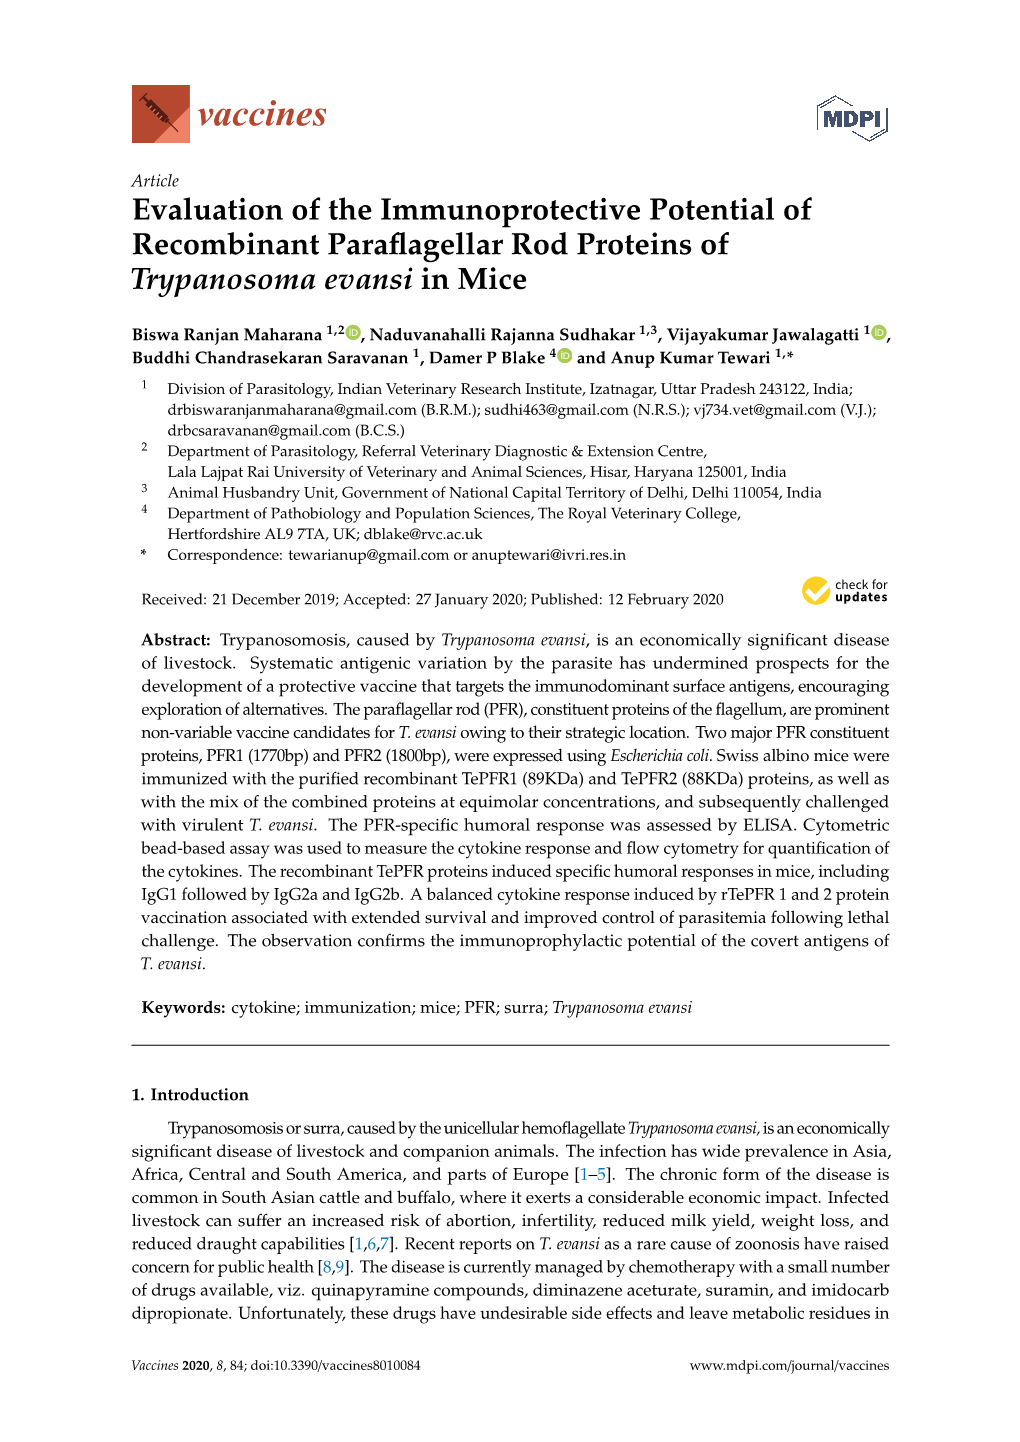 Evaluation of the Immunoprotective Potential of Recombinant Paraﬂagellar Rod Proteins of Trypanosoma Evansi in Mice